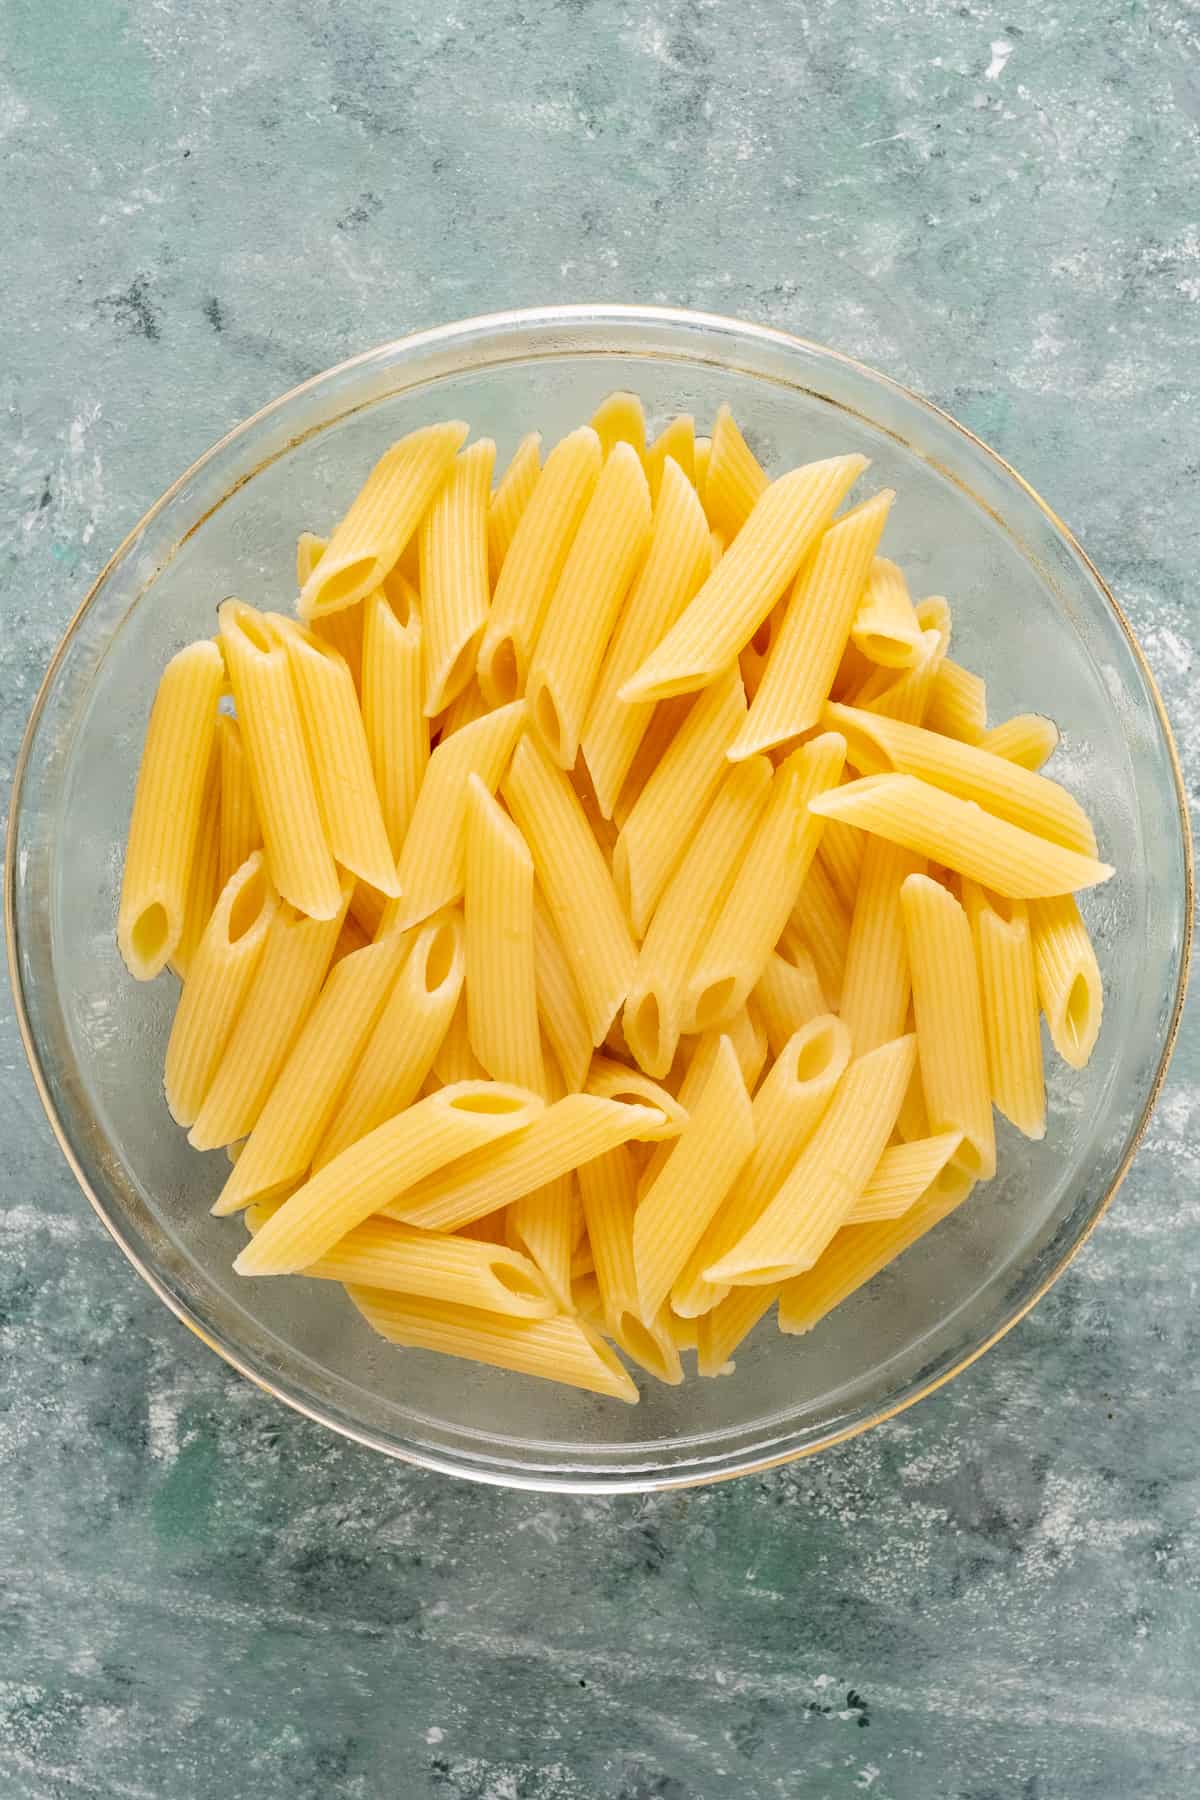 Cooked penne pasta in a glass bowl.